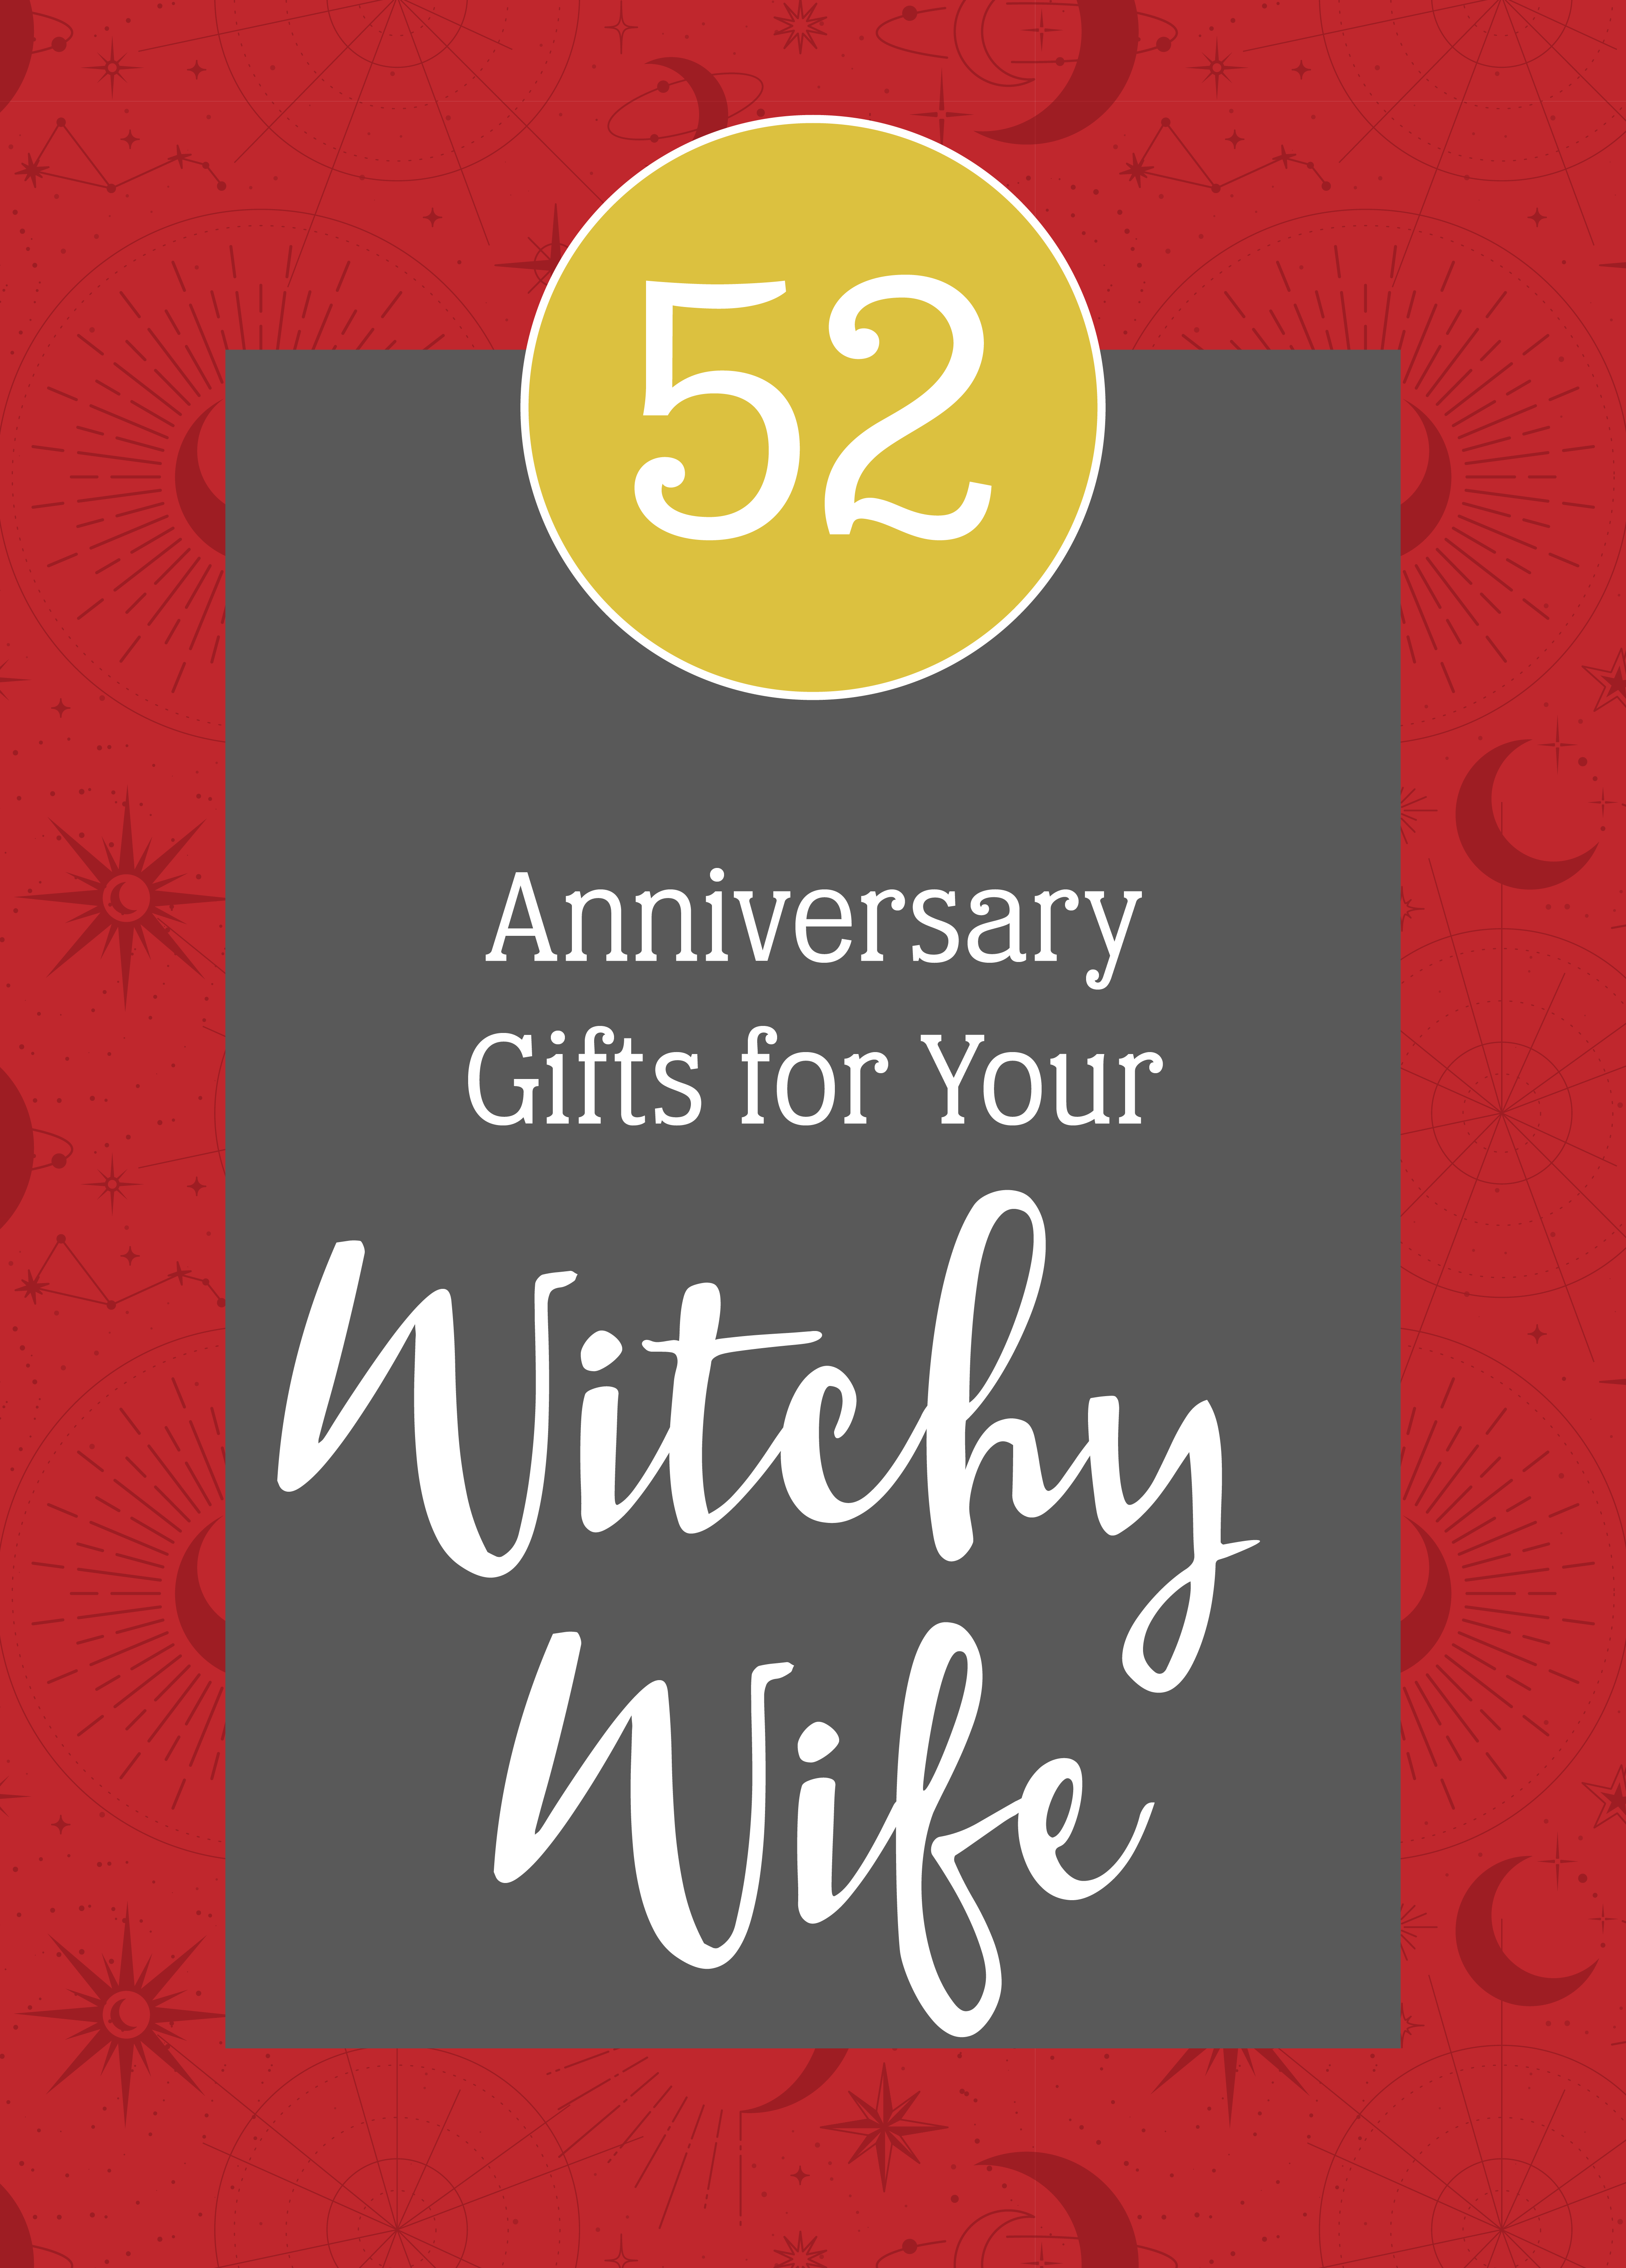 Red background with moon and star pattern with white text that reads '52 Anniversary Gifts for Your Witchy Wife"